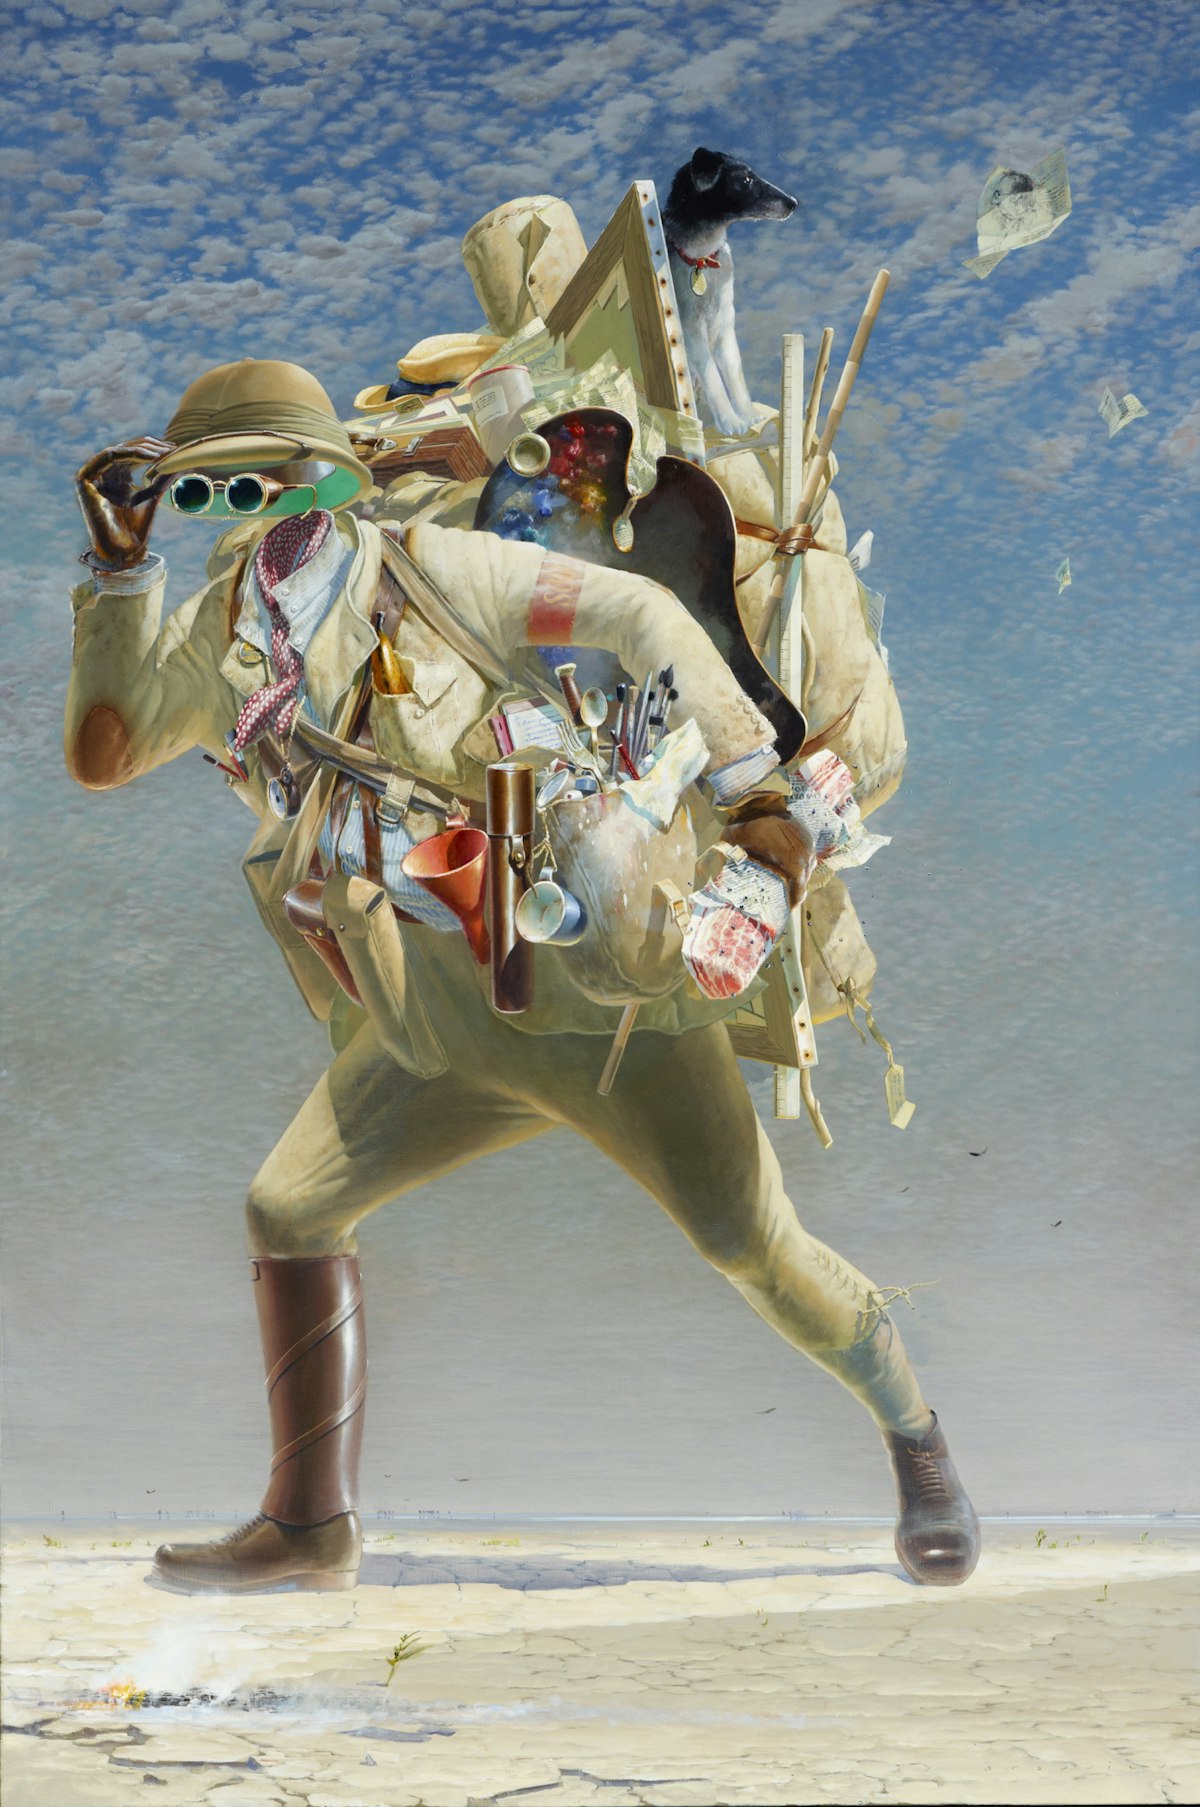 A faceless person carrying many items striding across a desert landscape